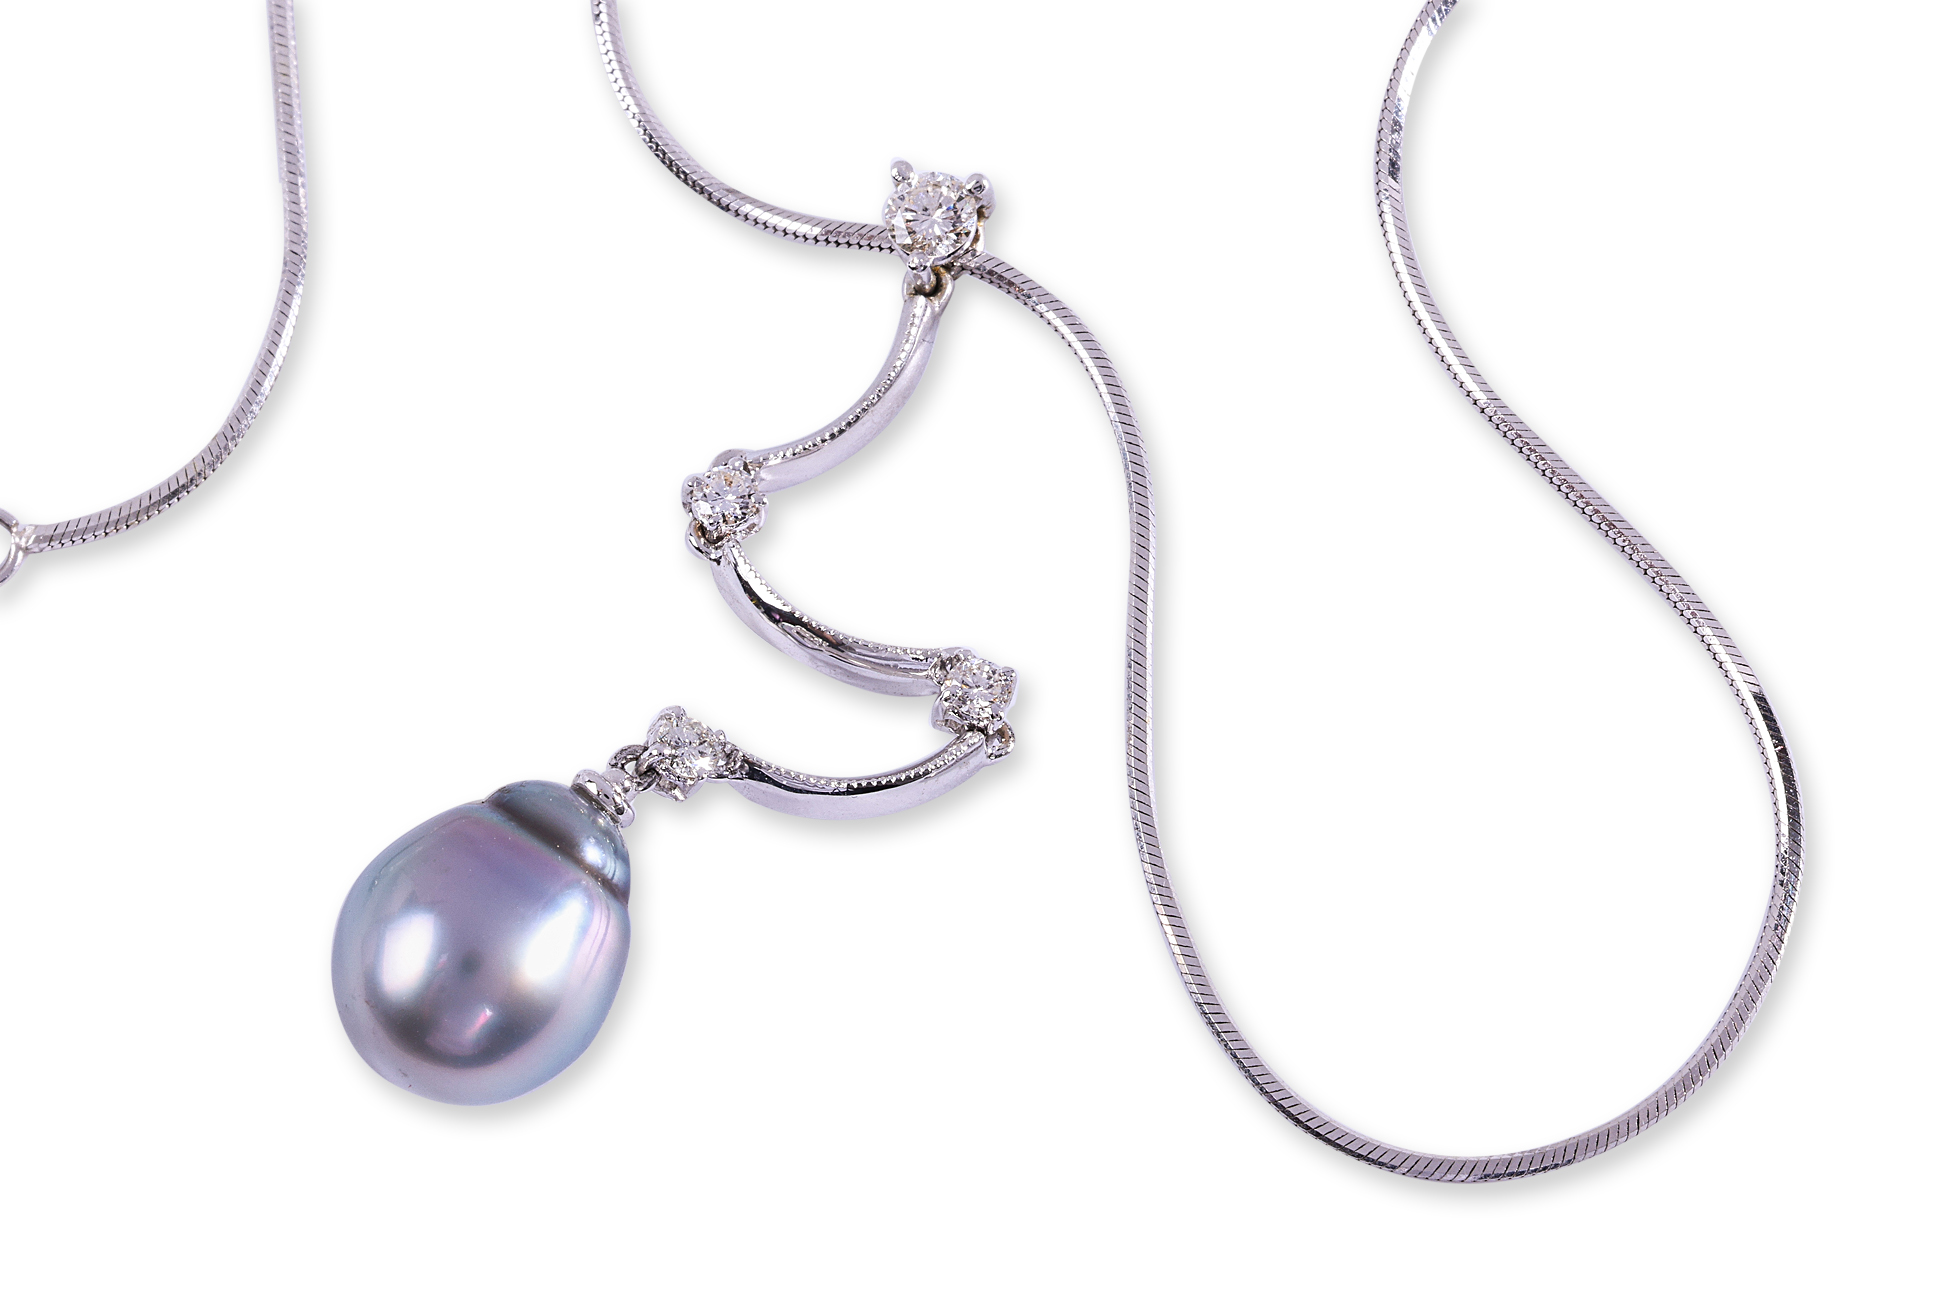 A CULTURED BAROQUE PEARL AND DIAMOND PENDANT NECKLACE - Image 2 of 3